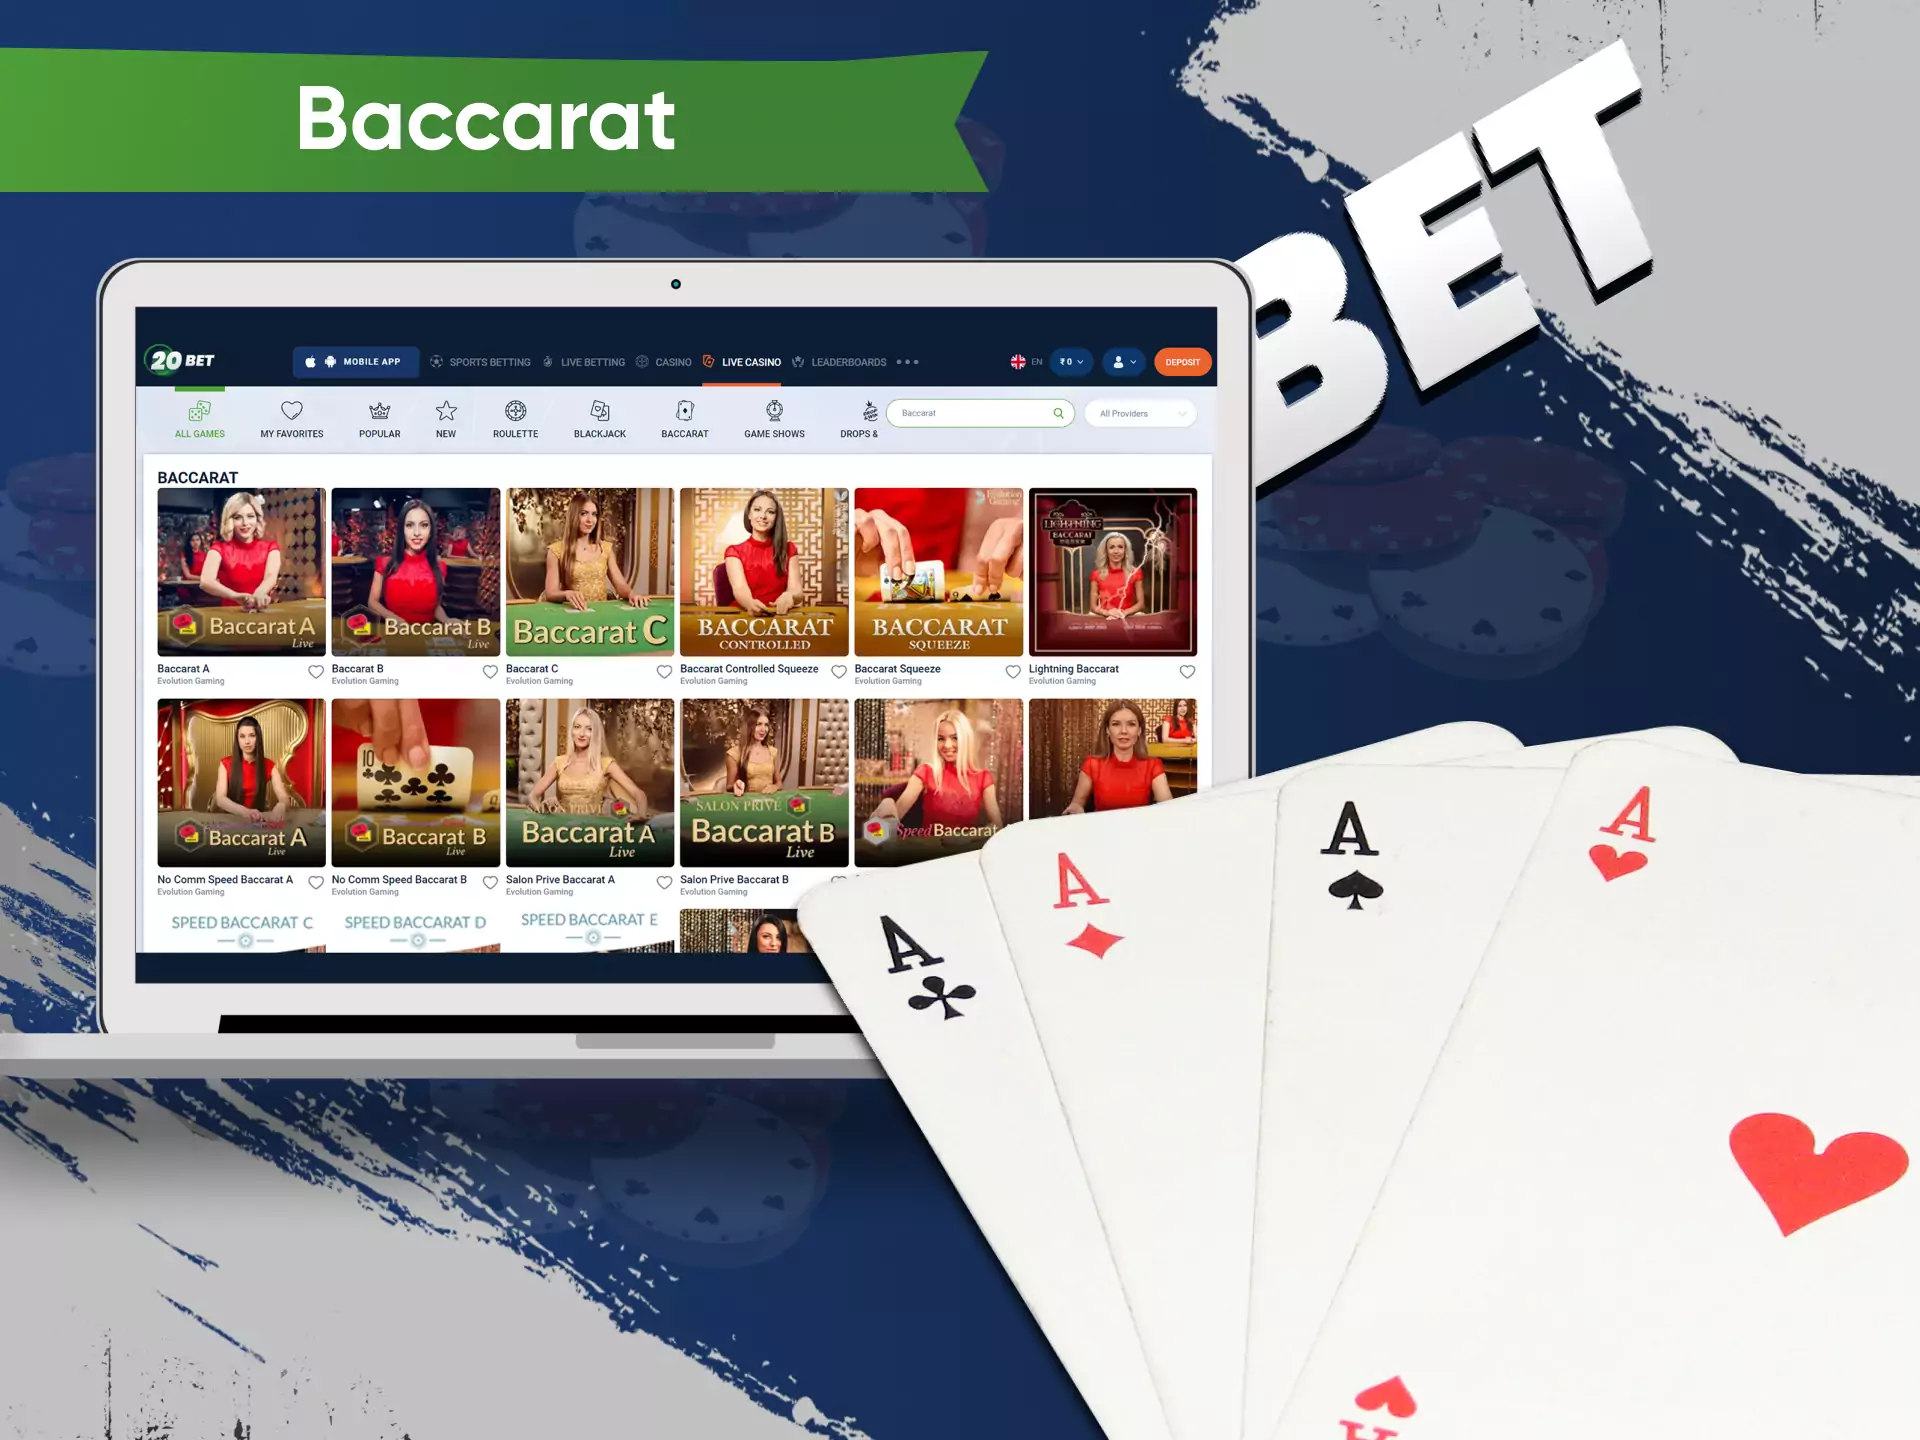 Visit the 20bet casino to play baccarat online.